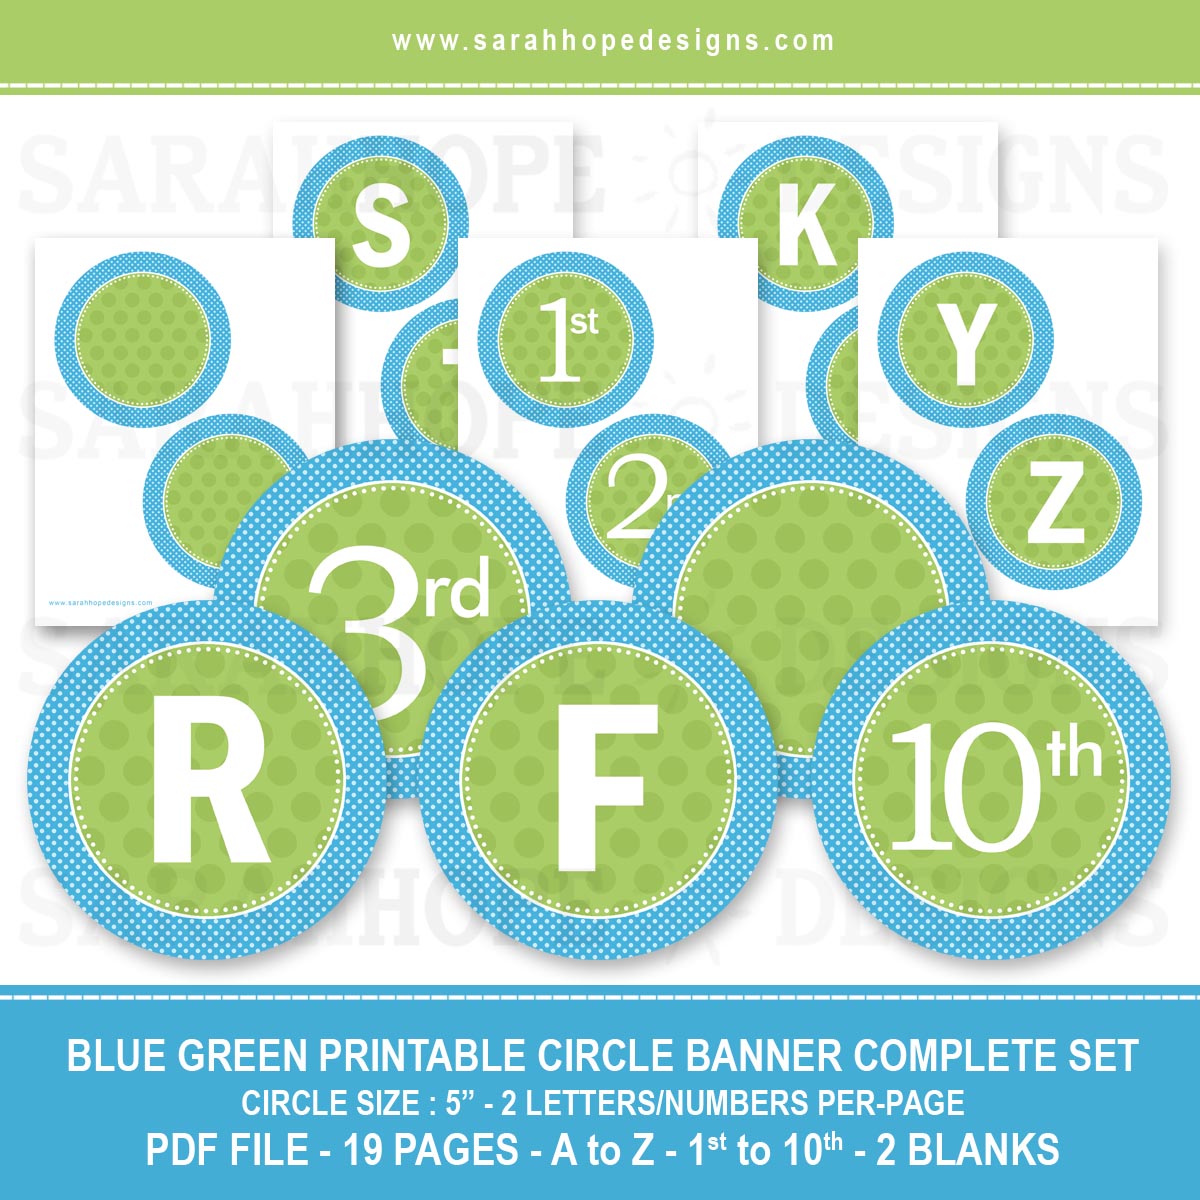 6-best-images-of-blue-banner-free-printable-letters-free-printable